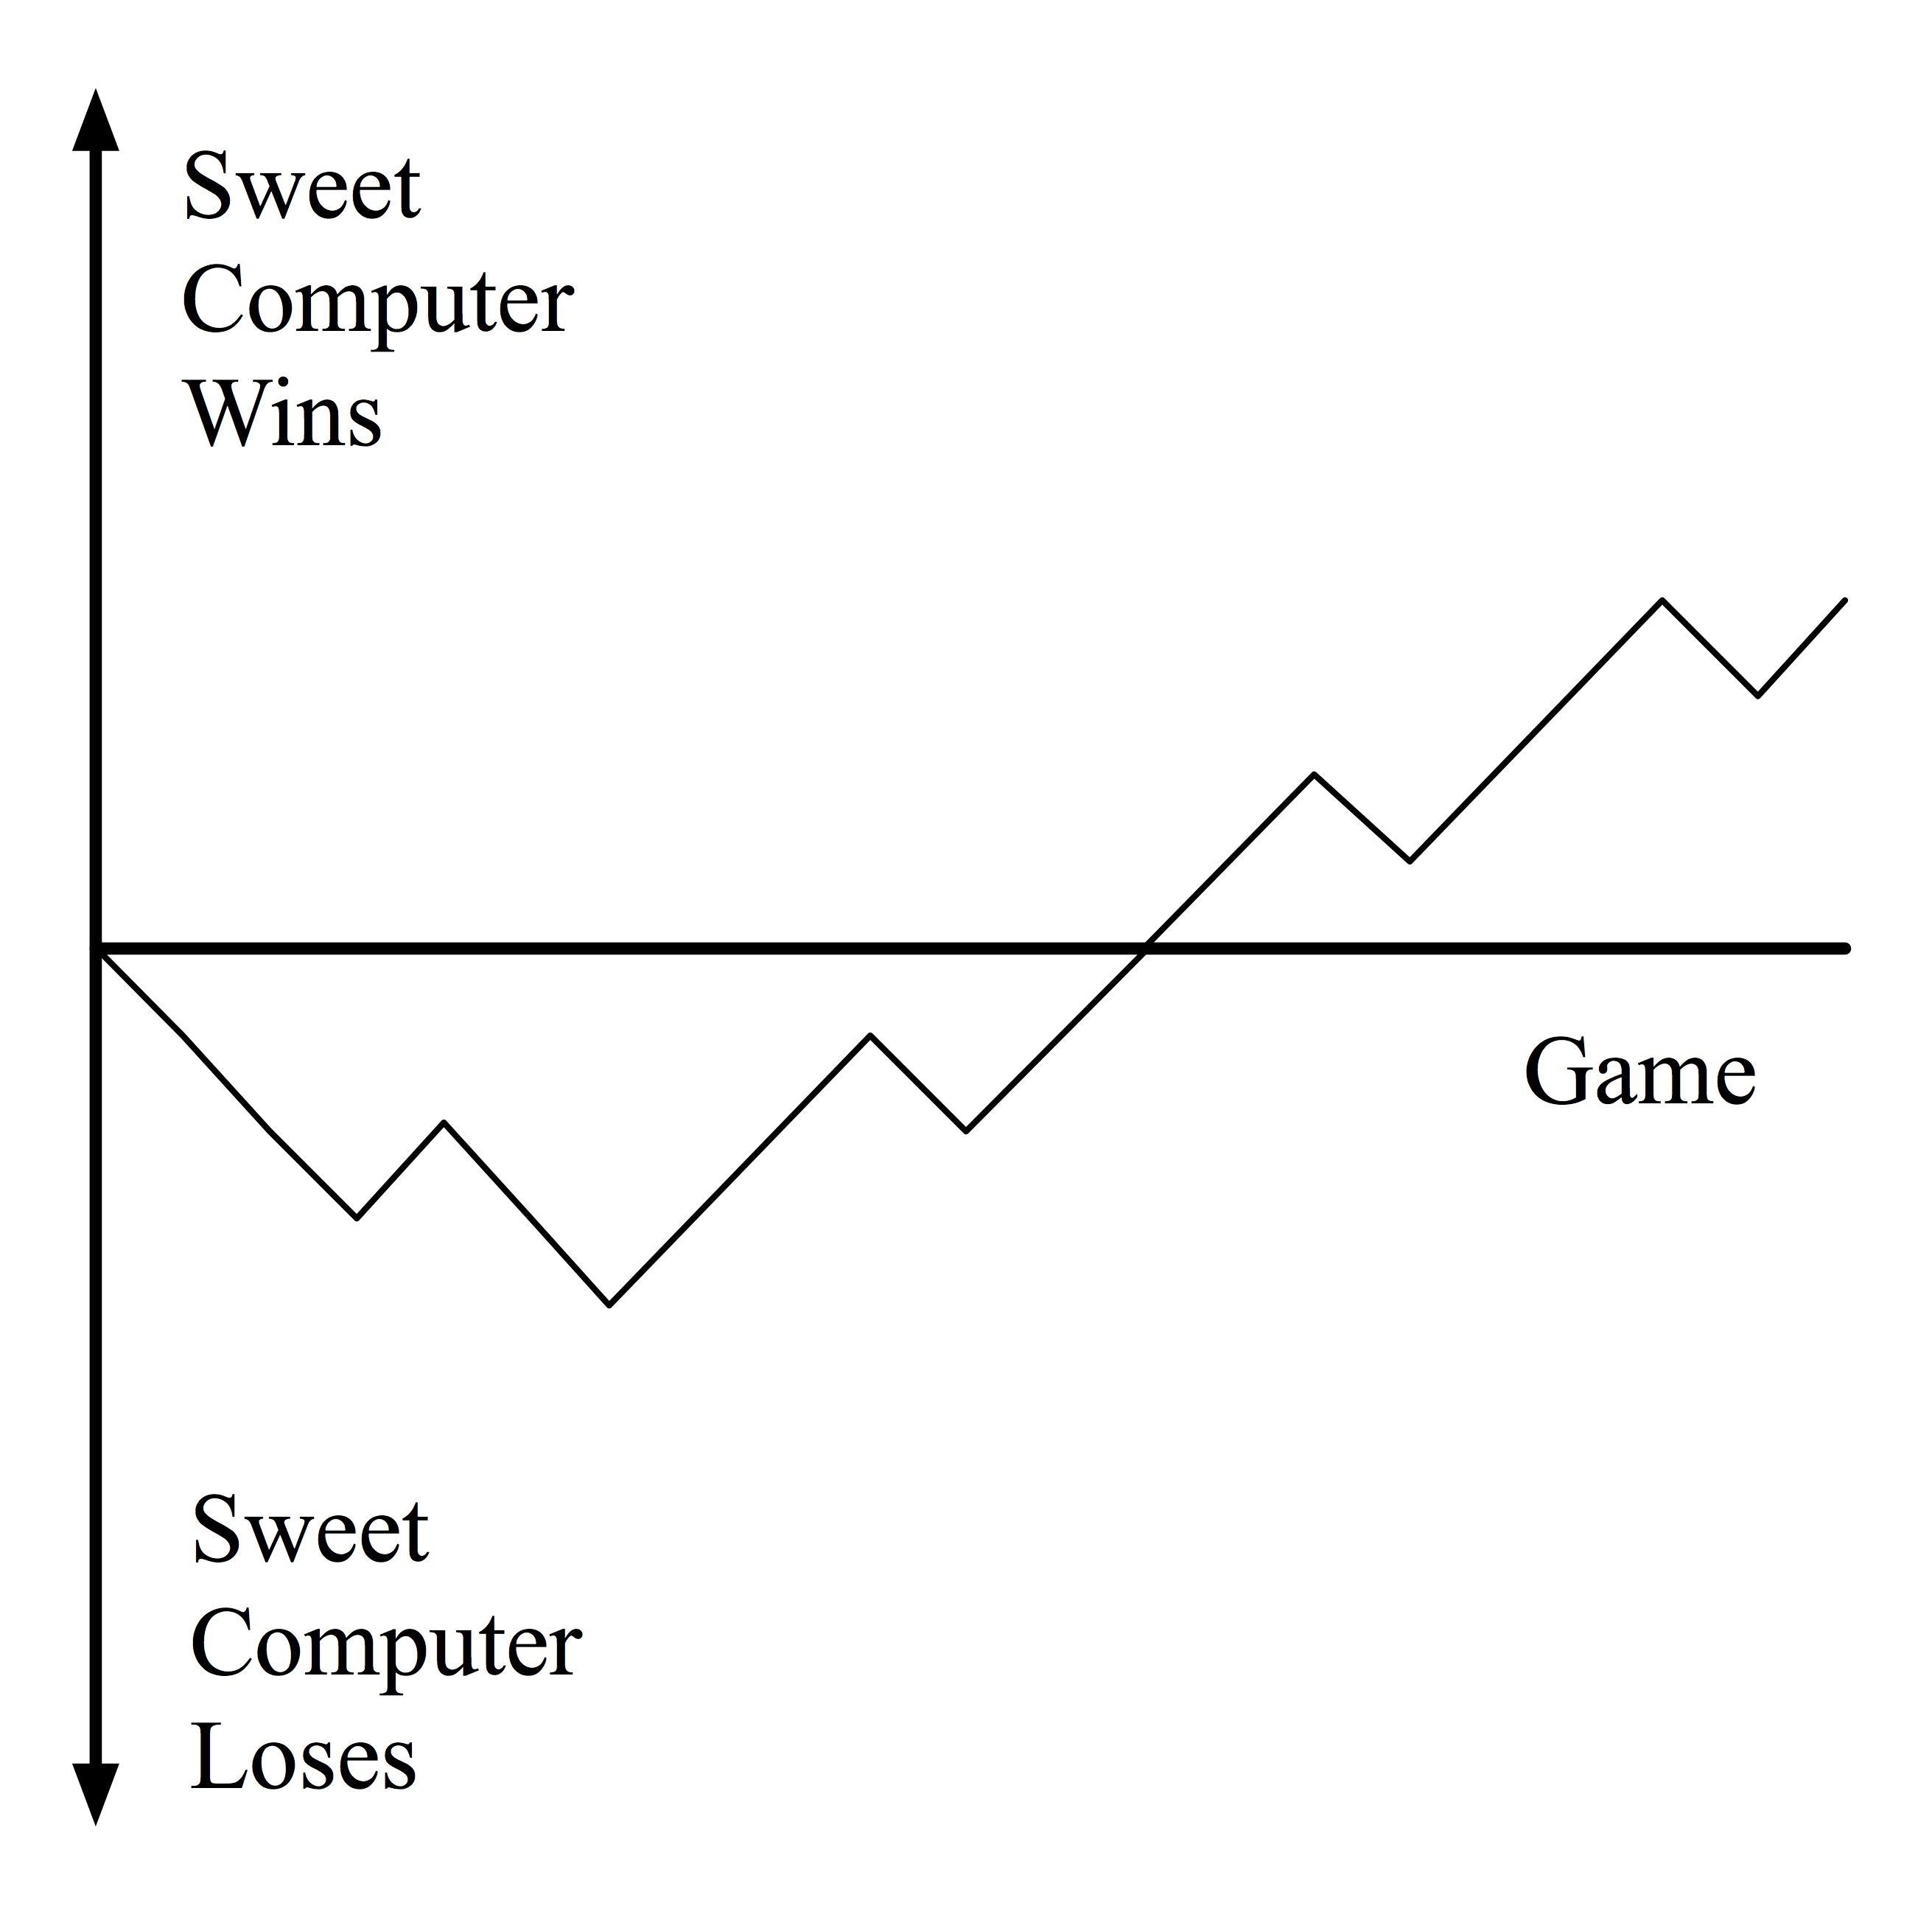 A graph showing the progress of the machine learning in one game